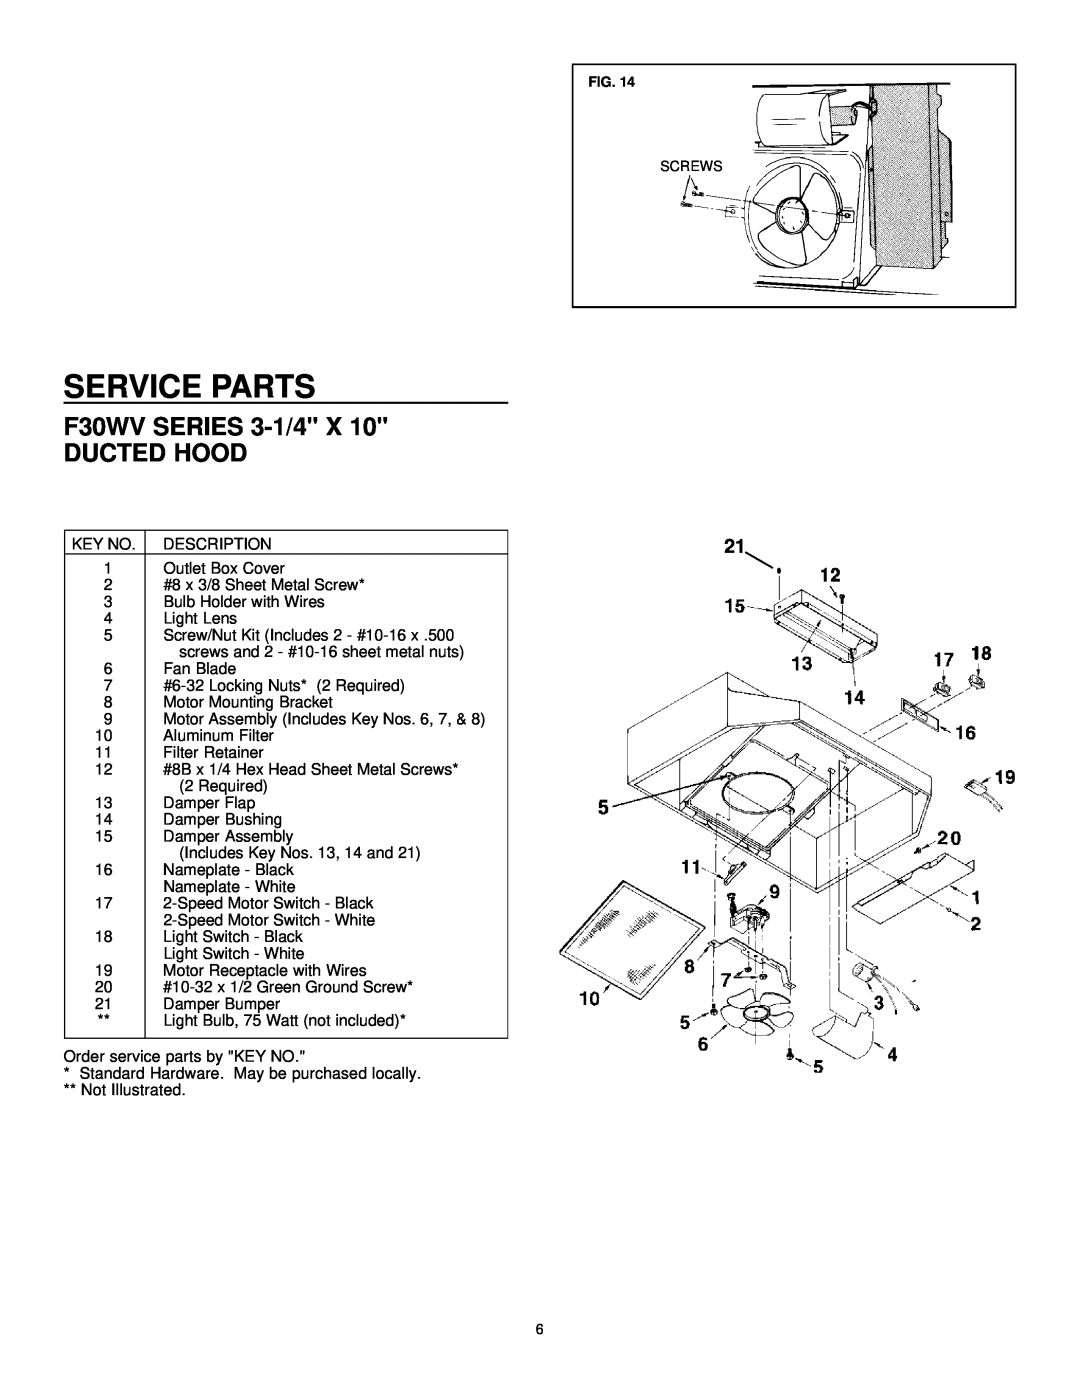 Frigidaire F24WR, F30WR installation instructions Service Parts, F30WV SERIES 3-1/4 X DUCTED HOOD 